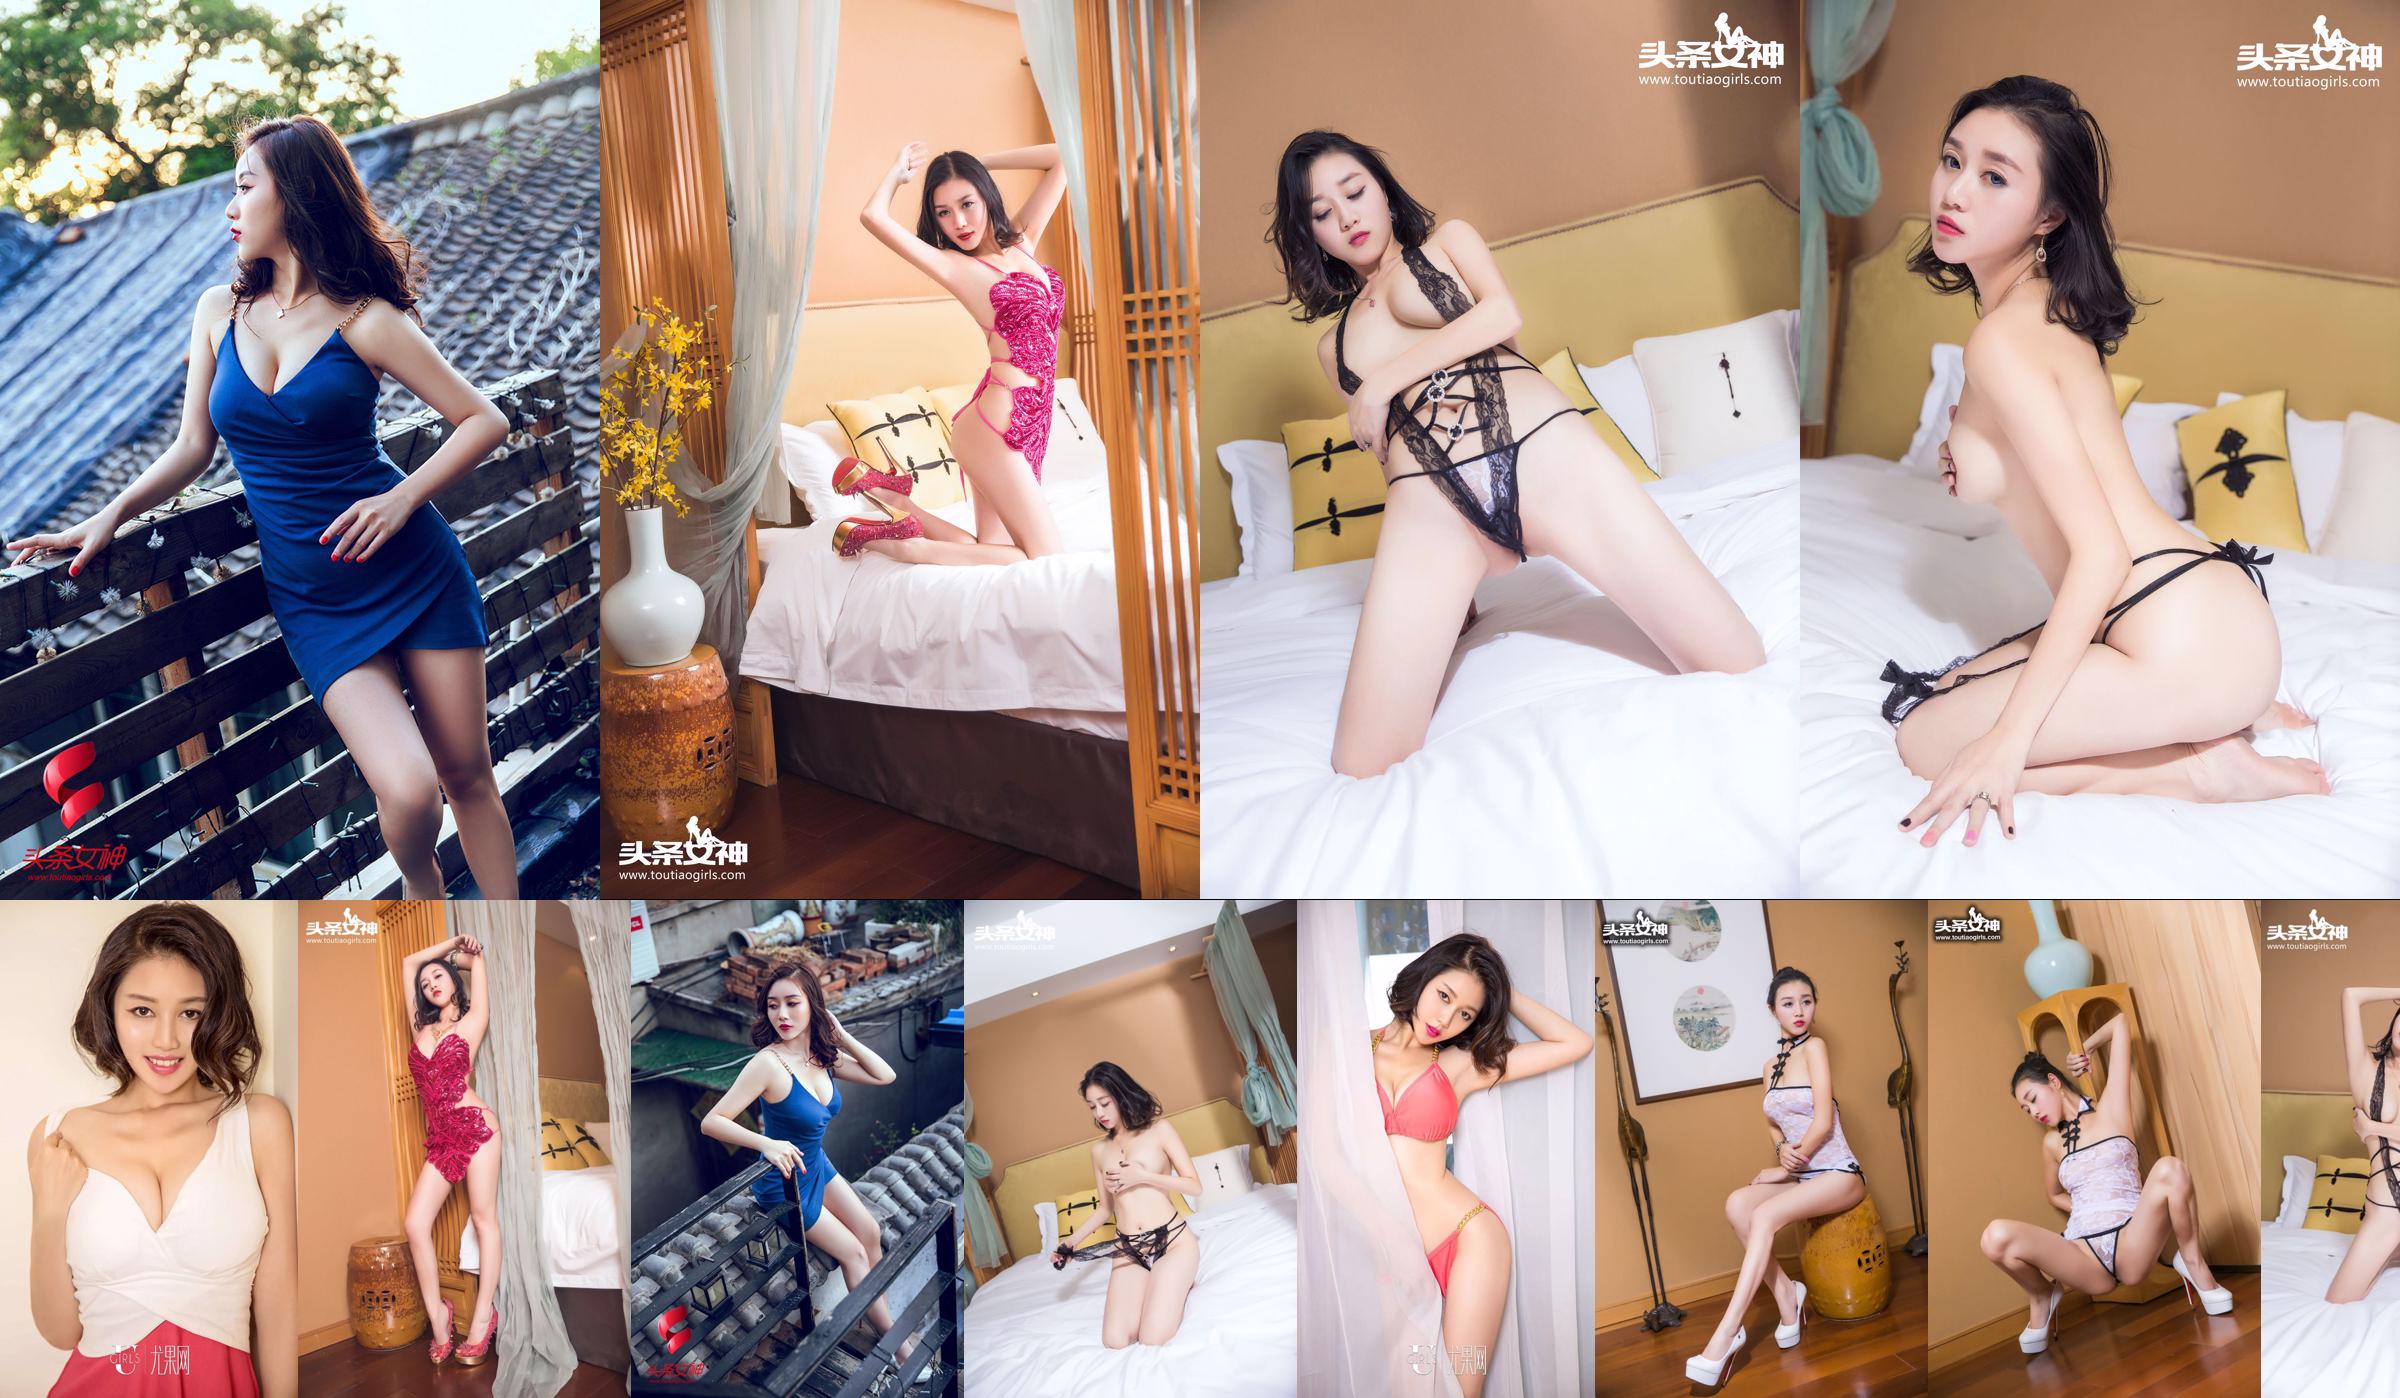 Zhang Ziran "The End of Summer Is So Cool" [Aiyouwu Ugirls] No.464 No.a55d95 Page 1